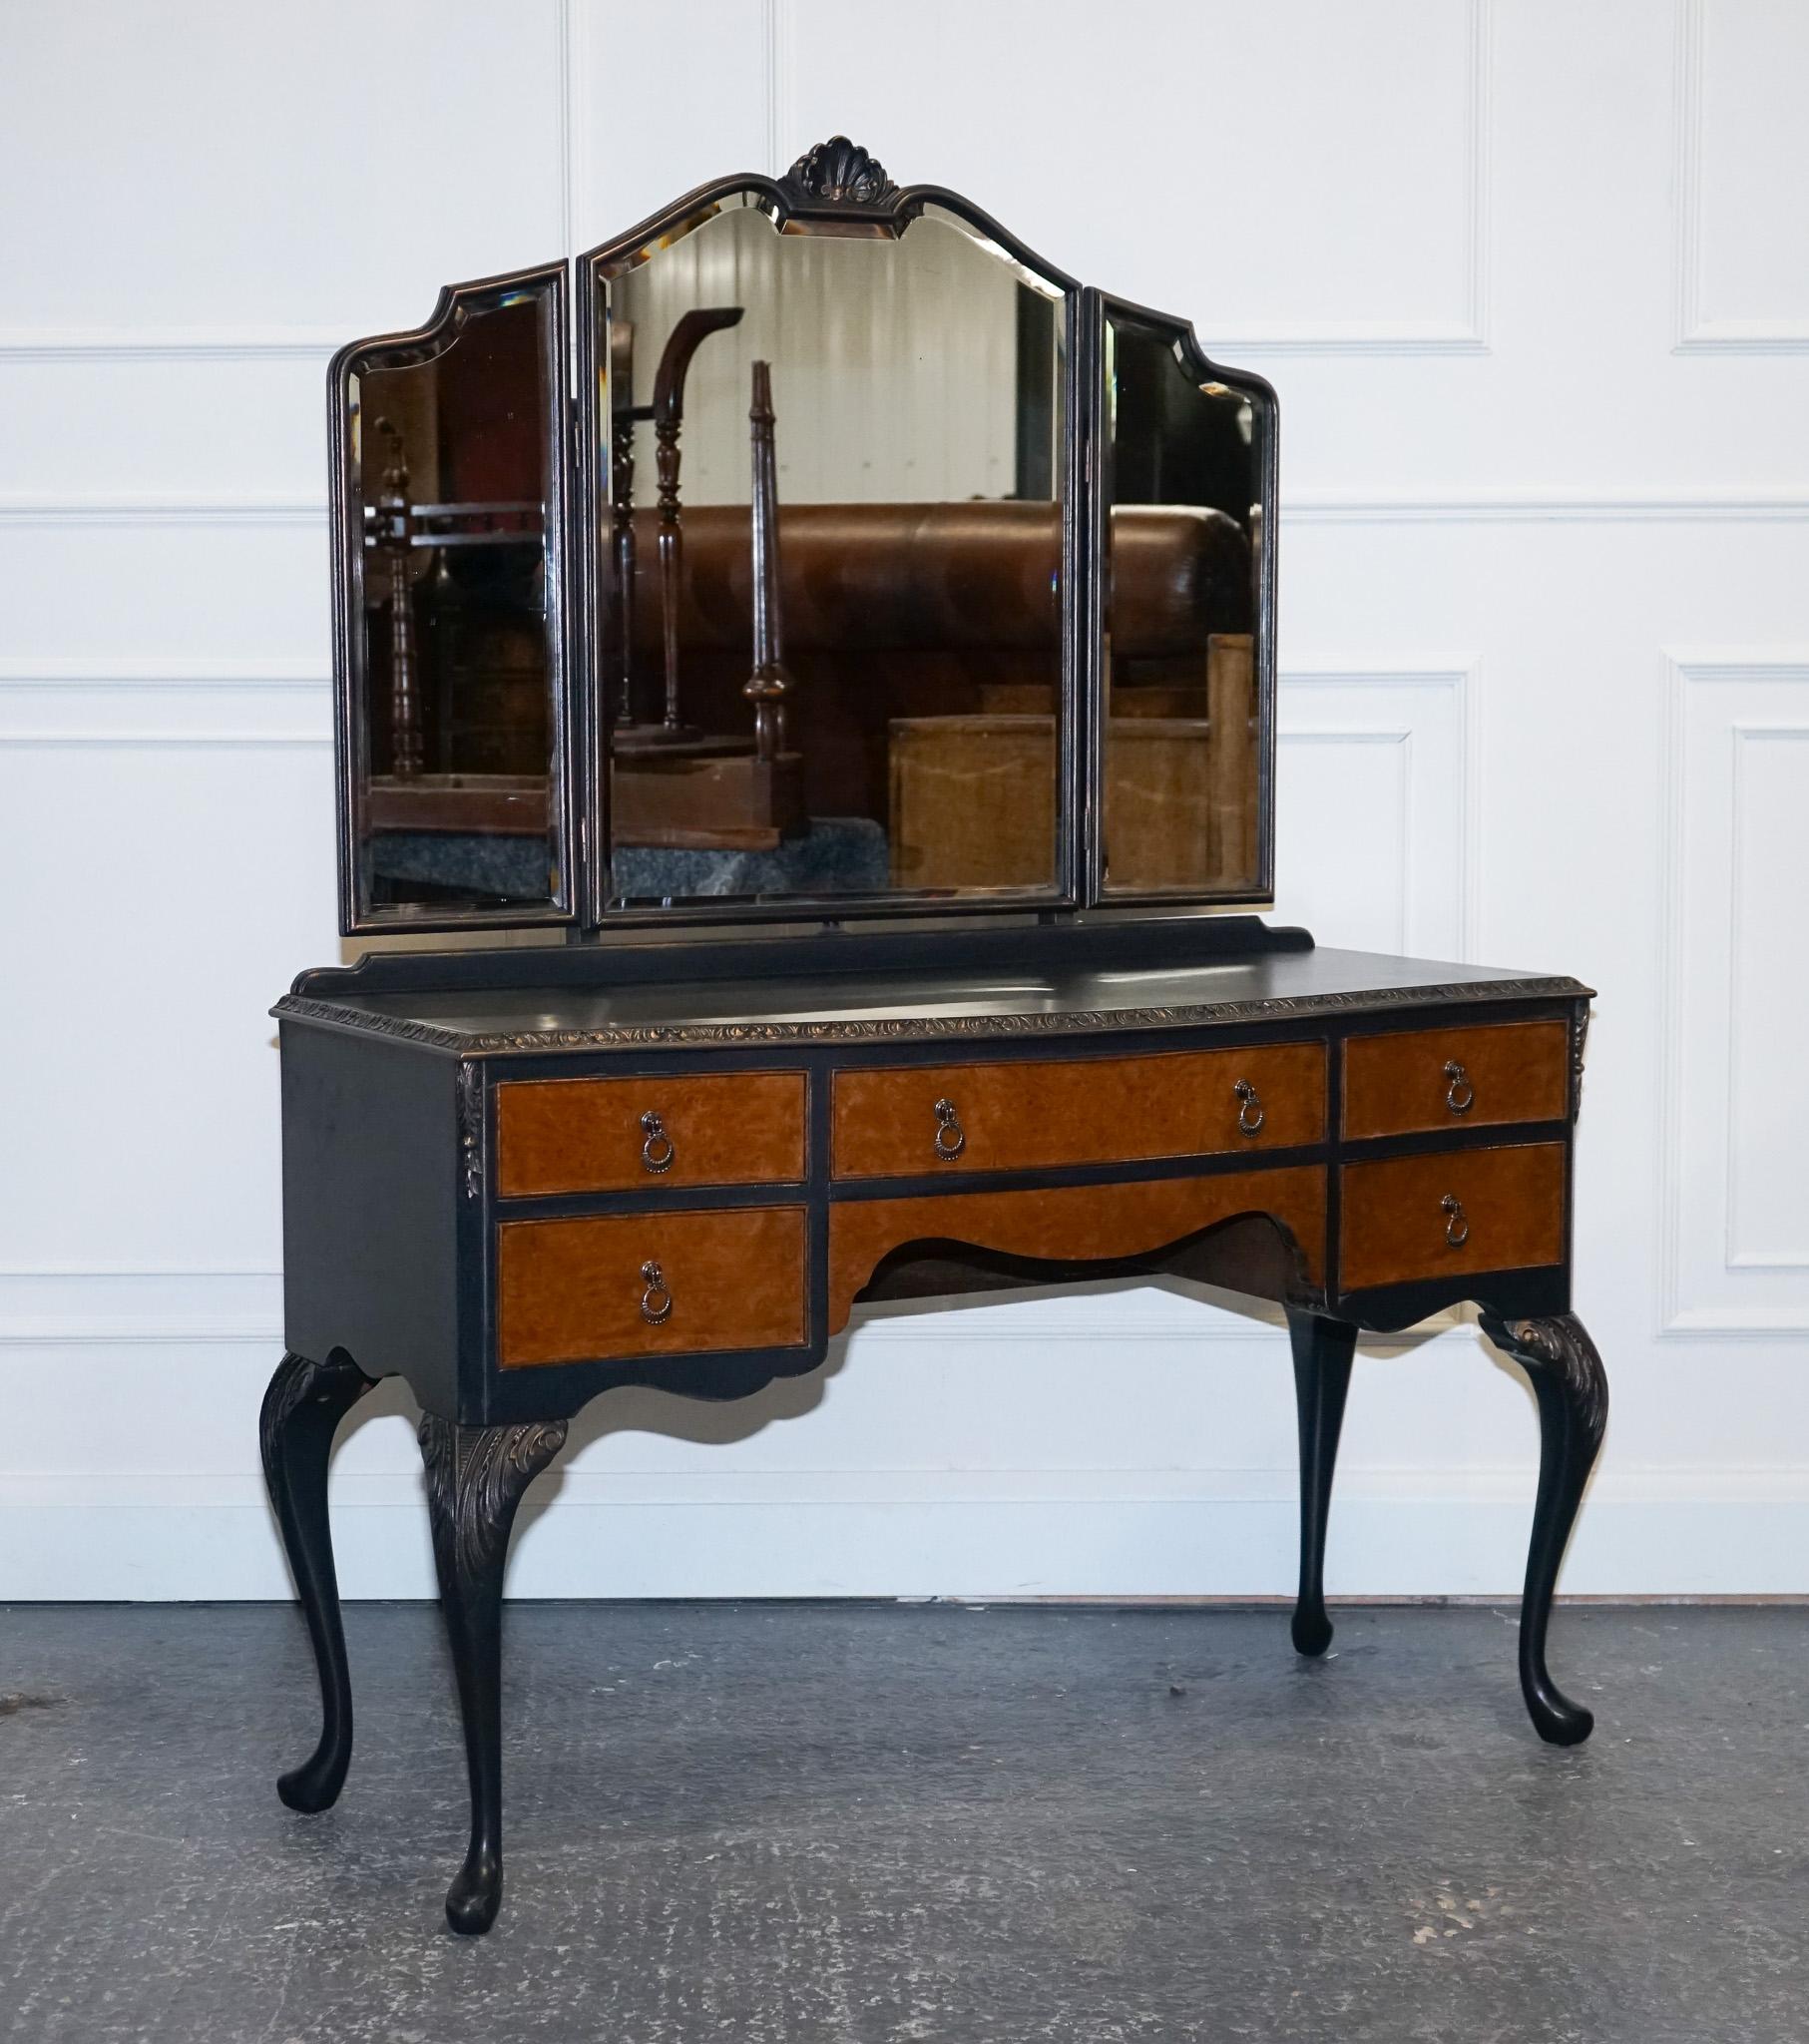 We are delighted to offer for sale this lovely Hand Painted Carbon Colour Dressing Table With Burr Walnut Drawers.

Introducing our extraordinary Hand Painted Carbon Colour Dressing Table with Burr Walnut Drawers. Crafted to perfection, this